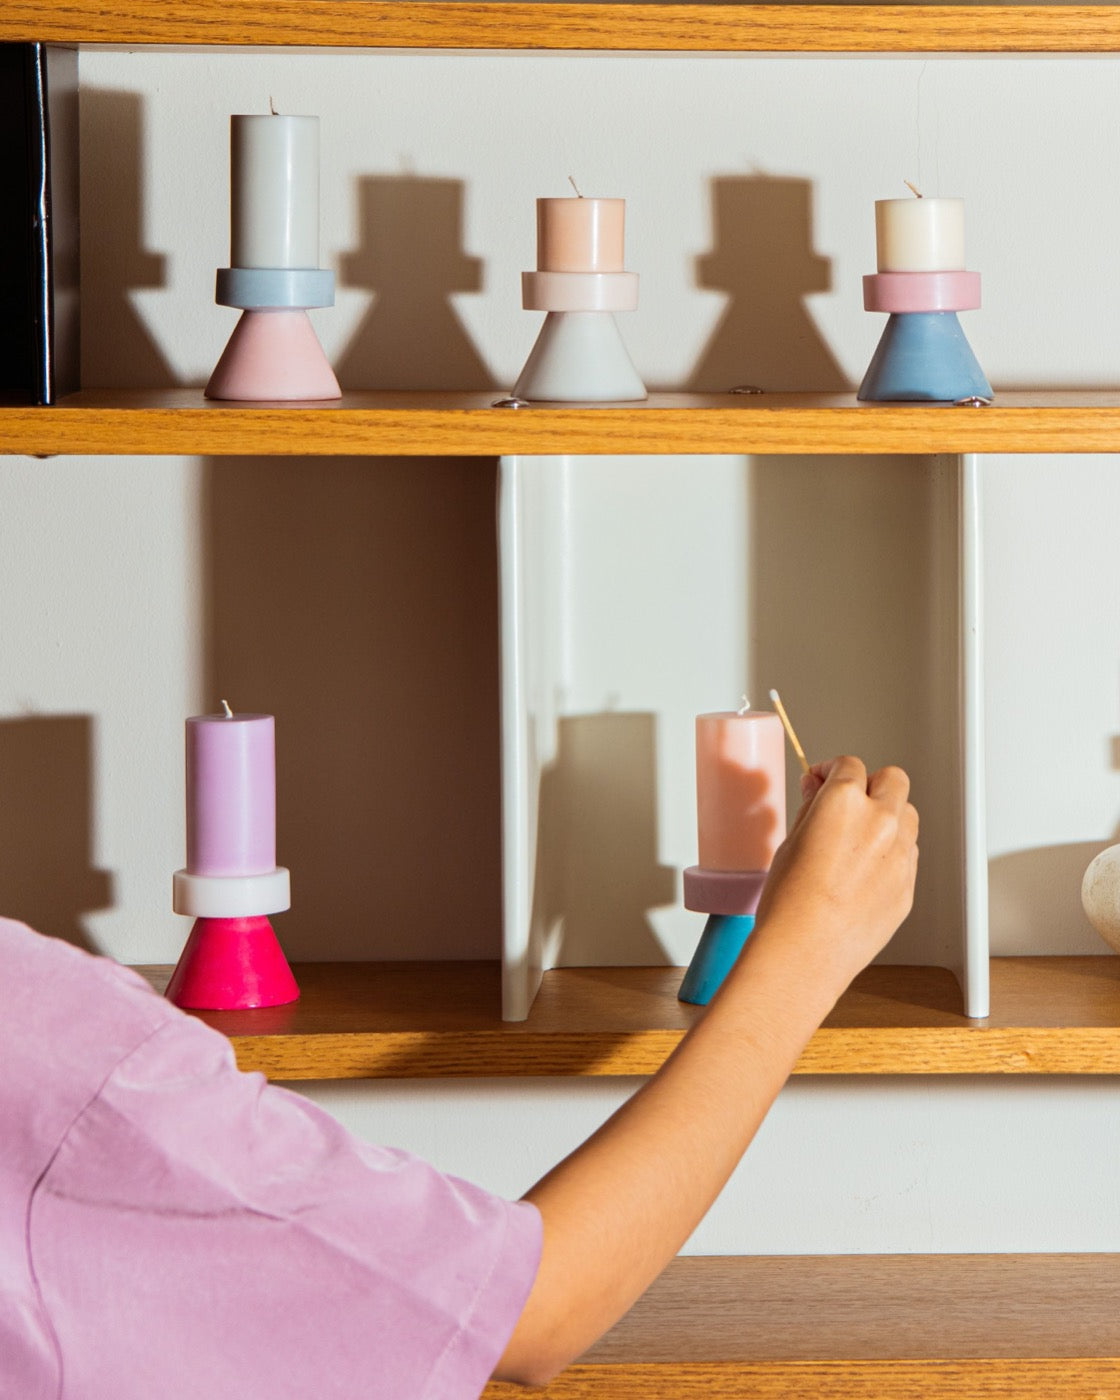 Stack Candle Tall, shaped candles by Yod and co in pink, purple, blue